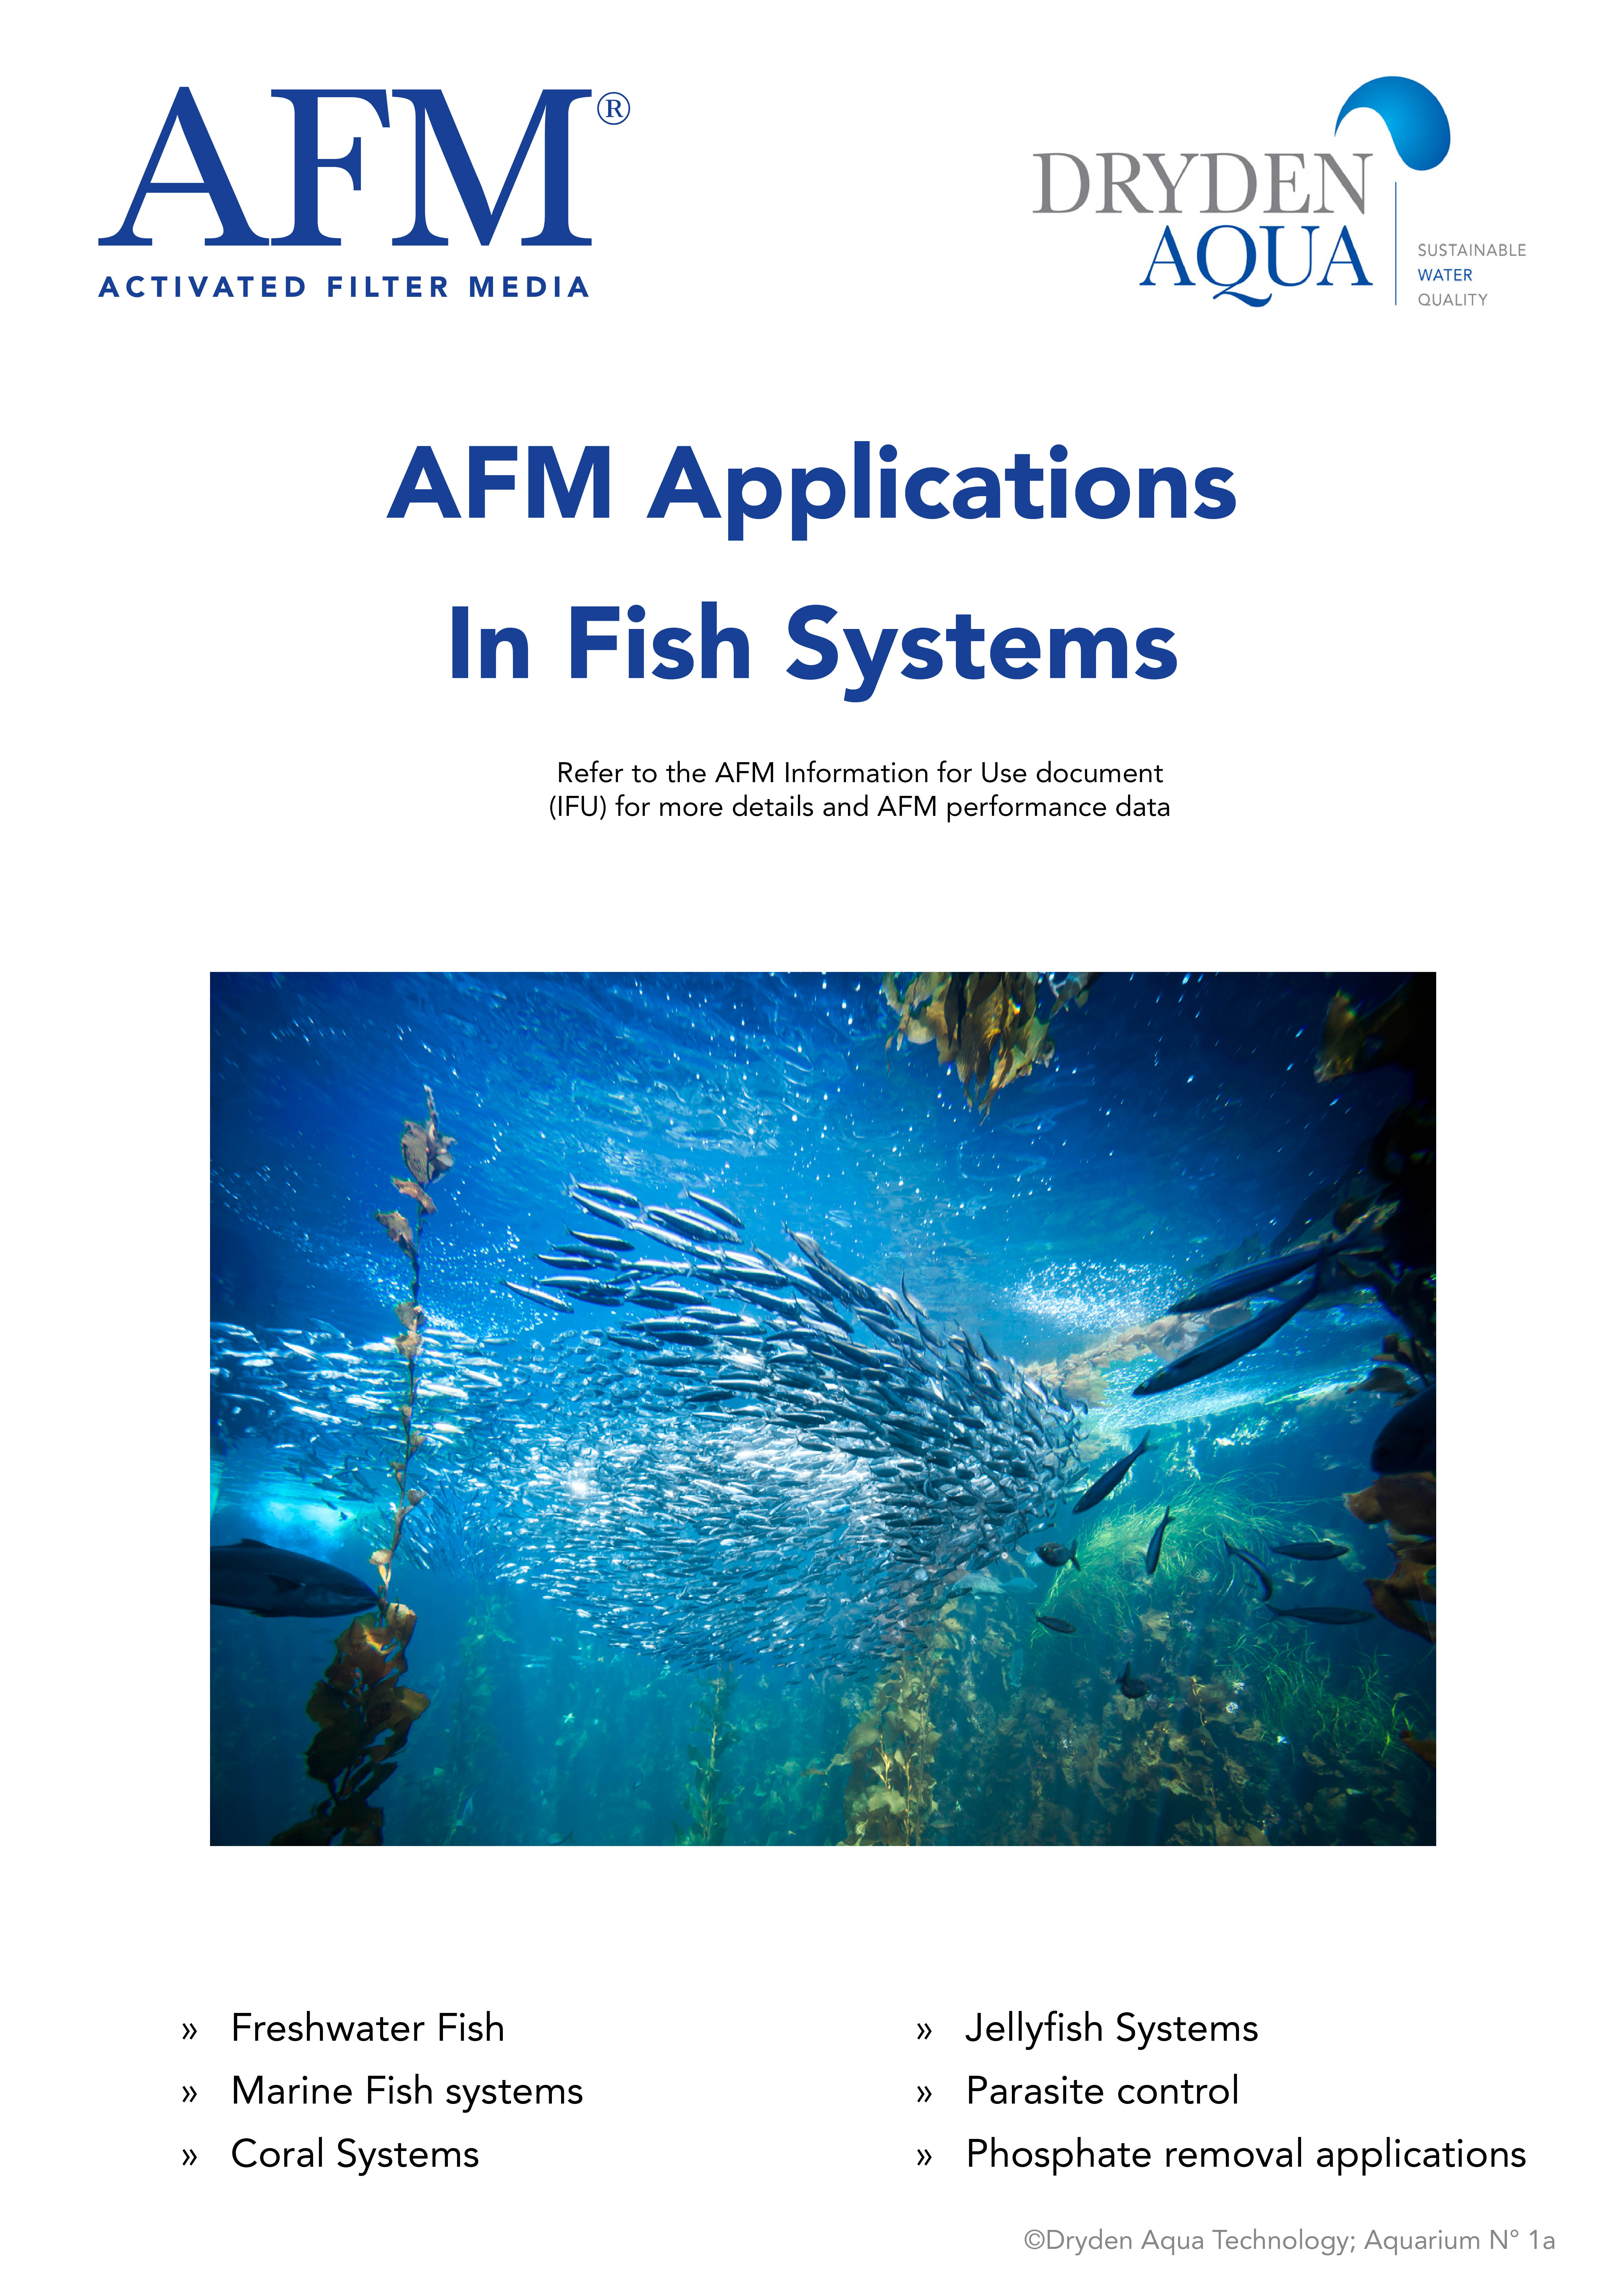 AFM Application in Fish Systems